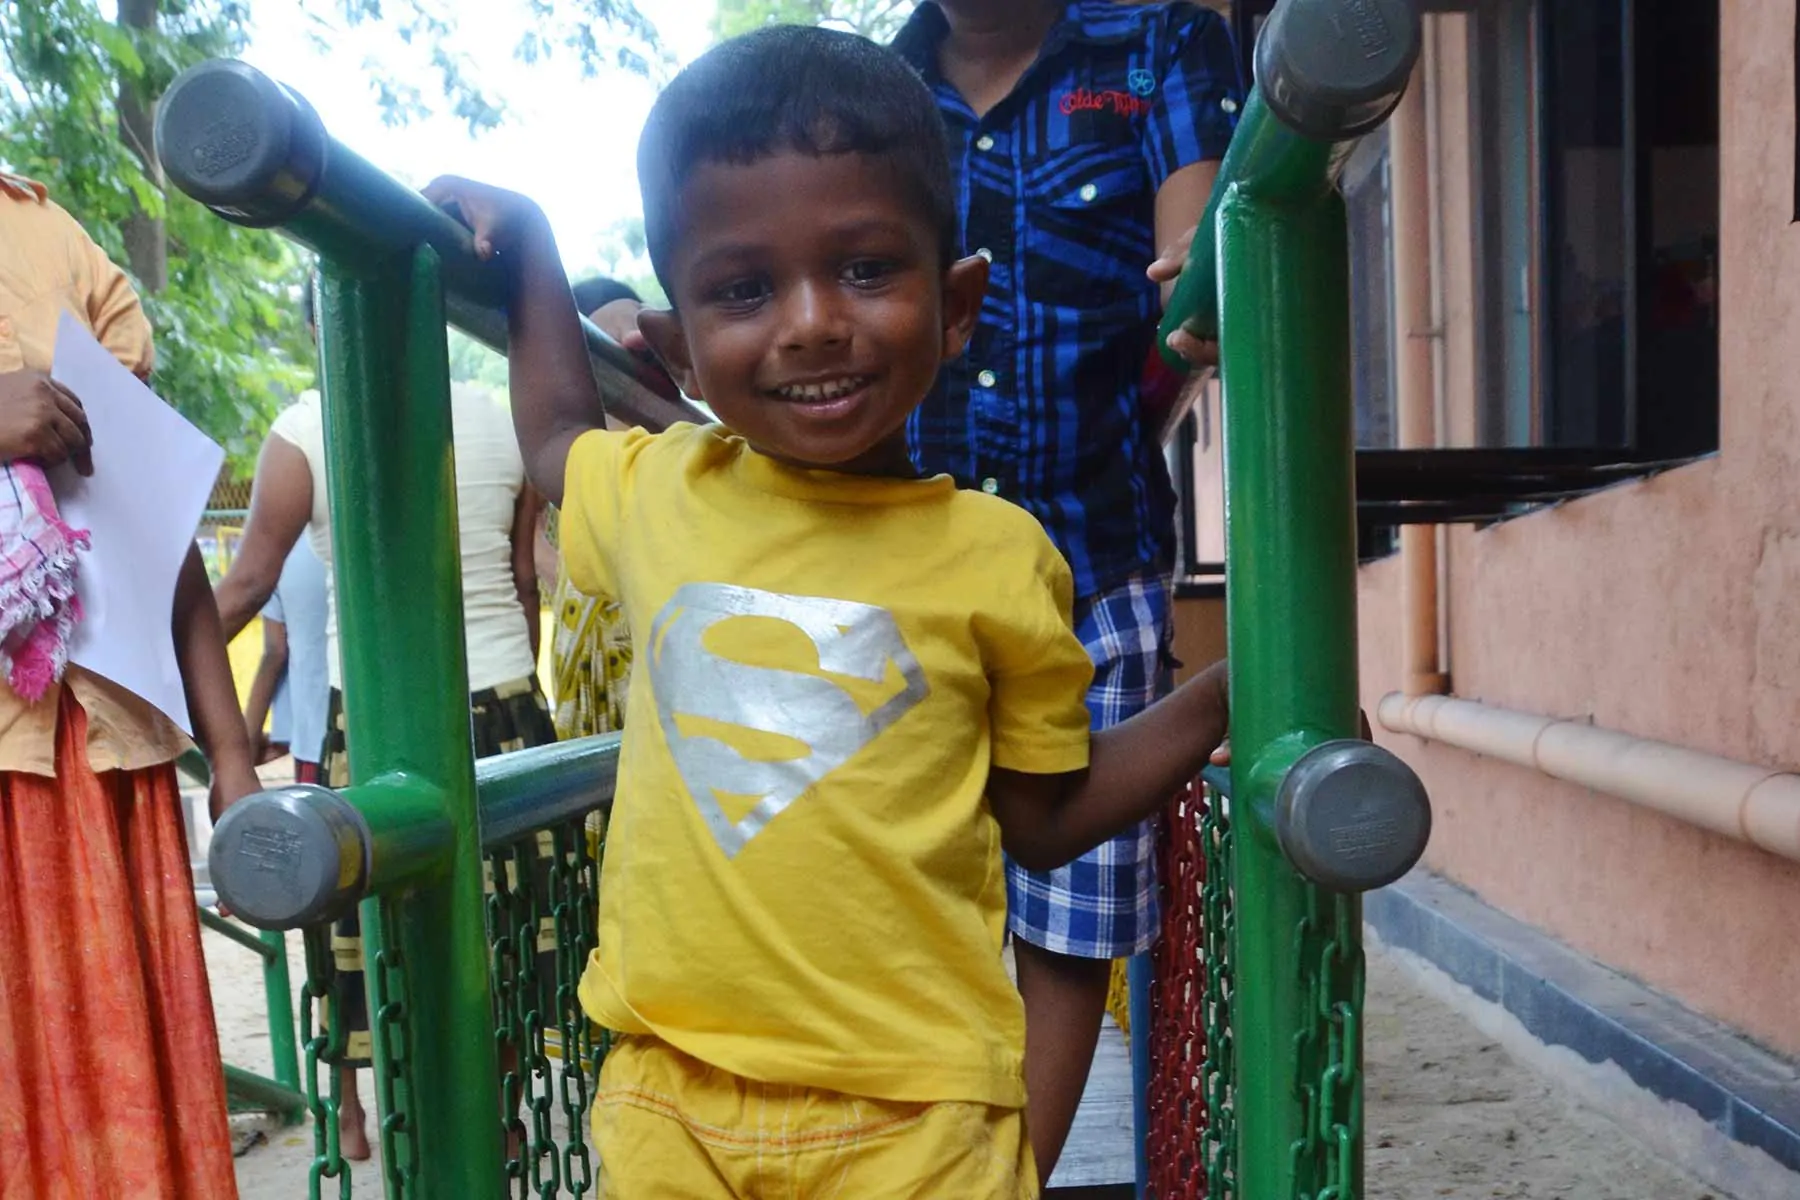 Young boy with a superman t-shirt smiles playing outside.